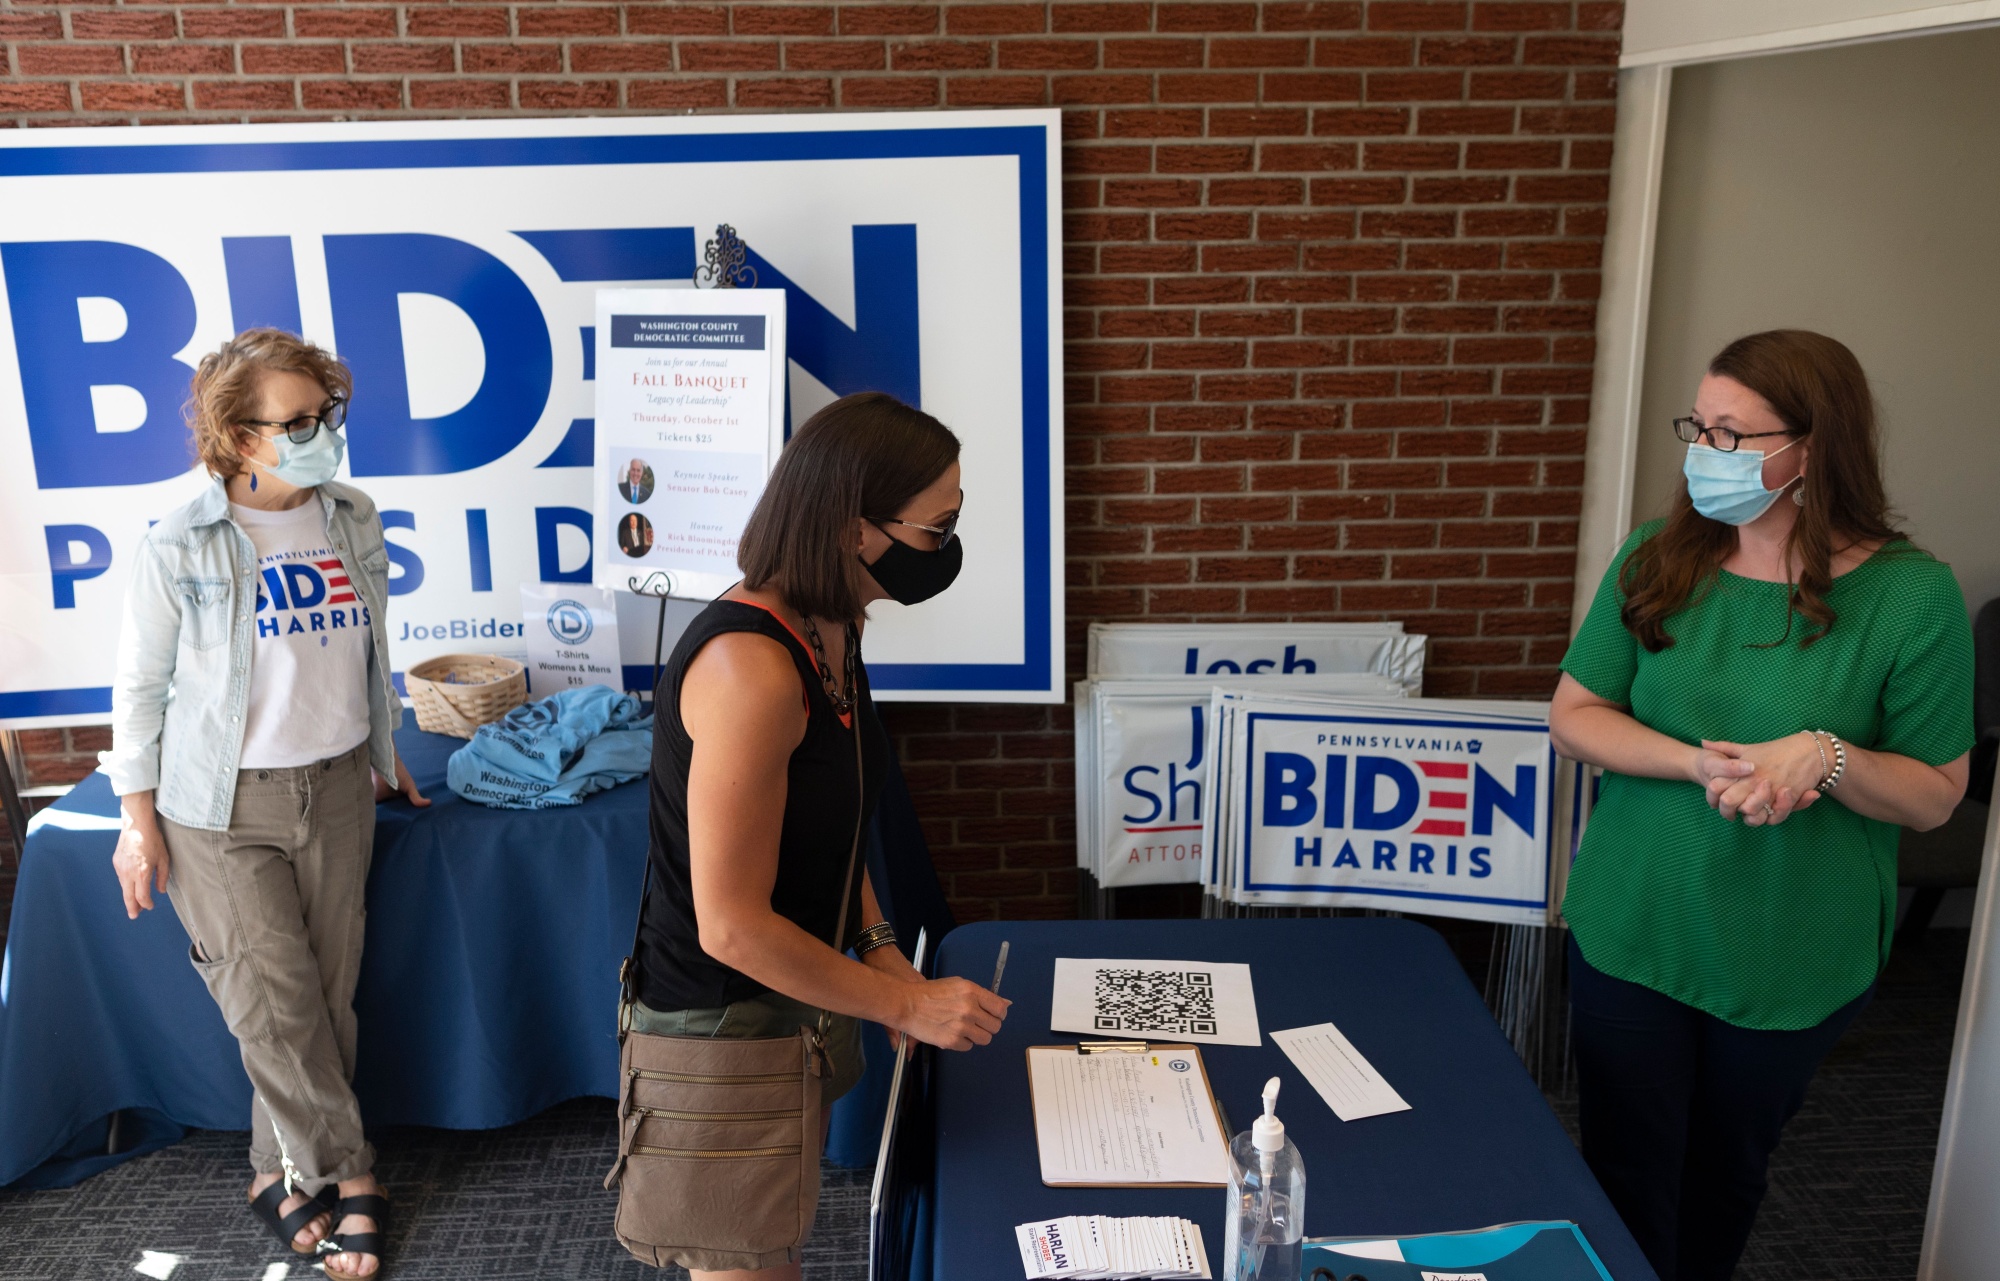 A woman signs up for a mailing list in Pennsylvania’s Washington County Democratic office before taking a yard sign for presidential candidate Joe Biden.&nbsp;